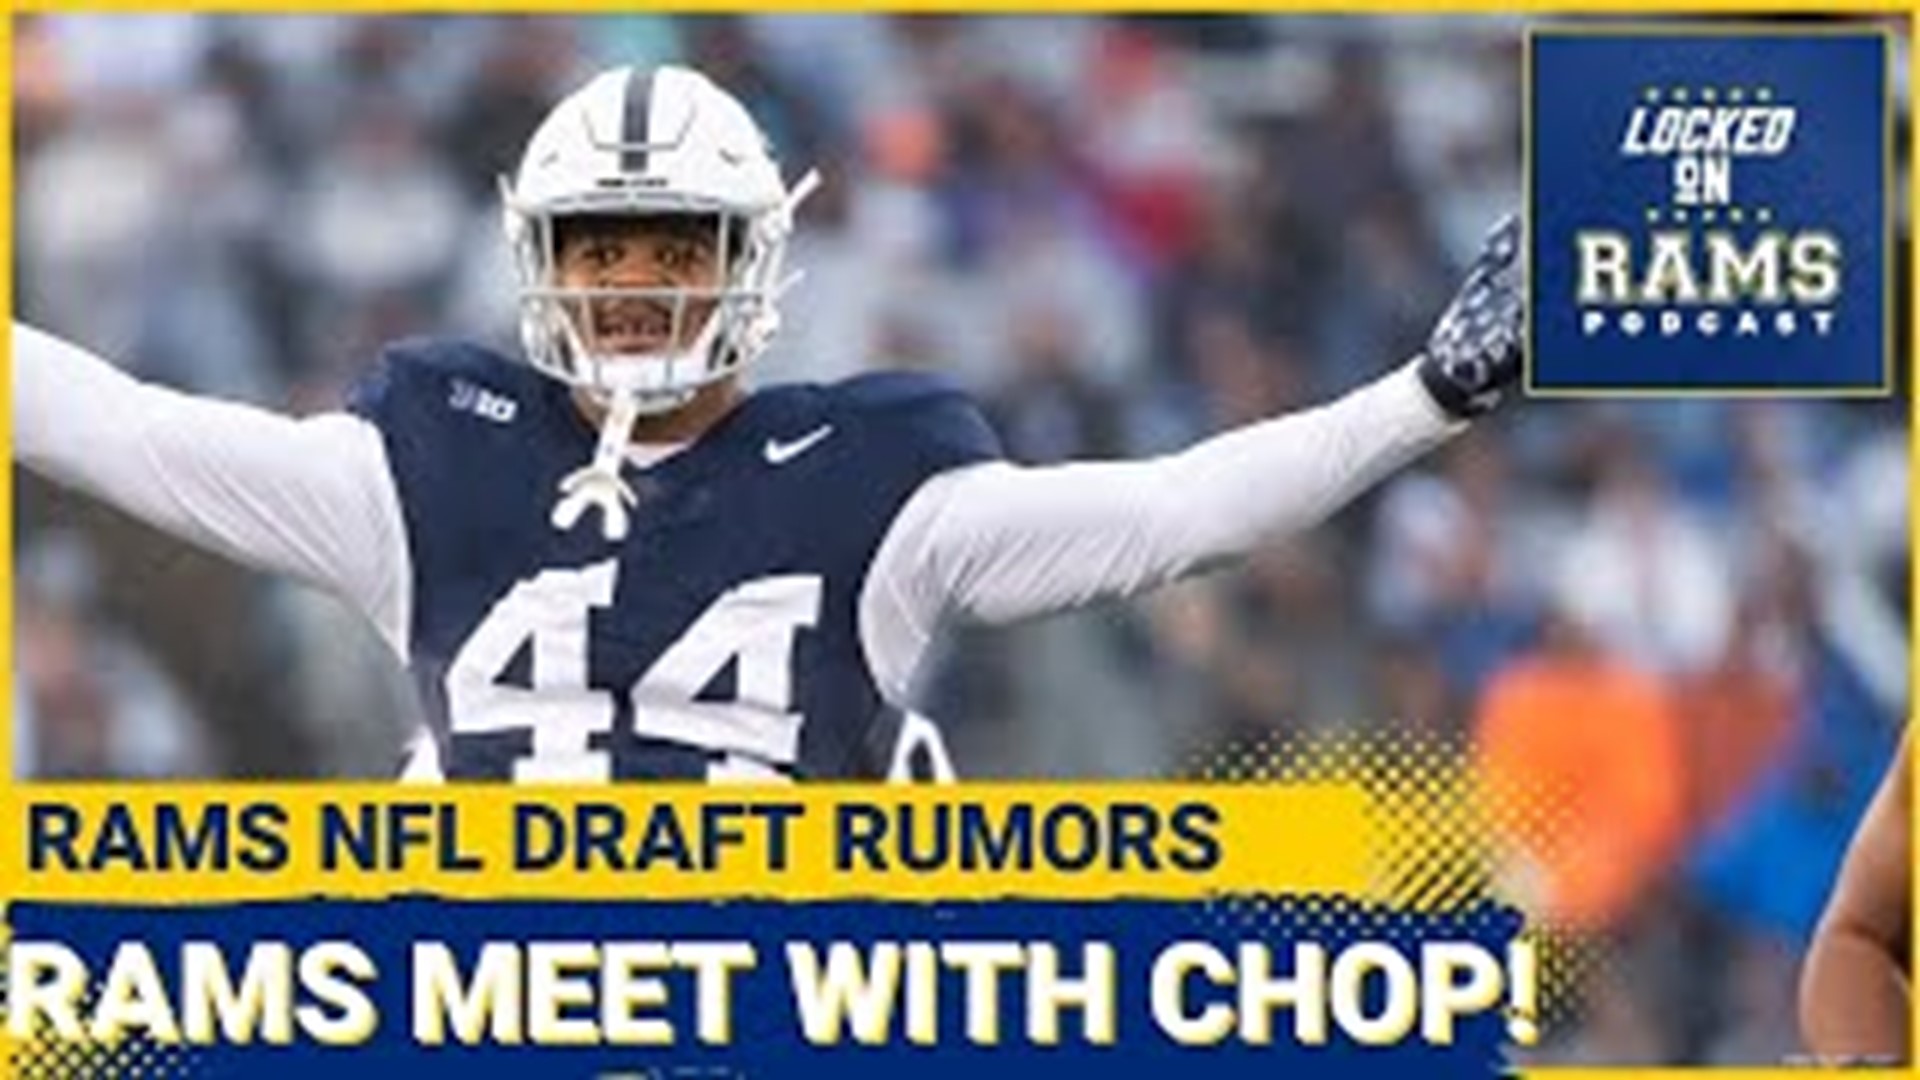 The Los Angeles Rams are reportedly meeting with Penn State Edge Rusher, Chop Robinson. D-Mac and Travis discuss if the Rams are considering Chop Robinson.